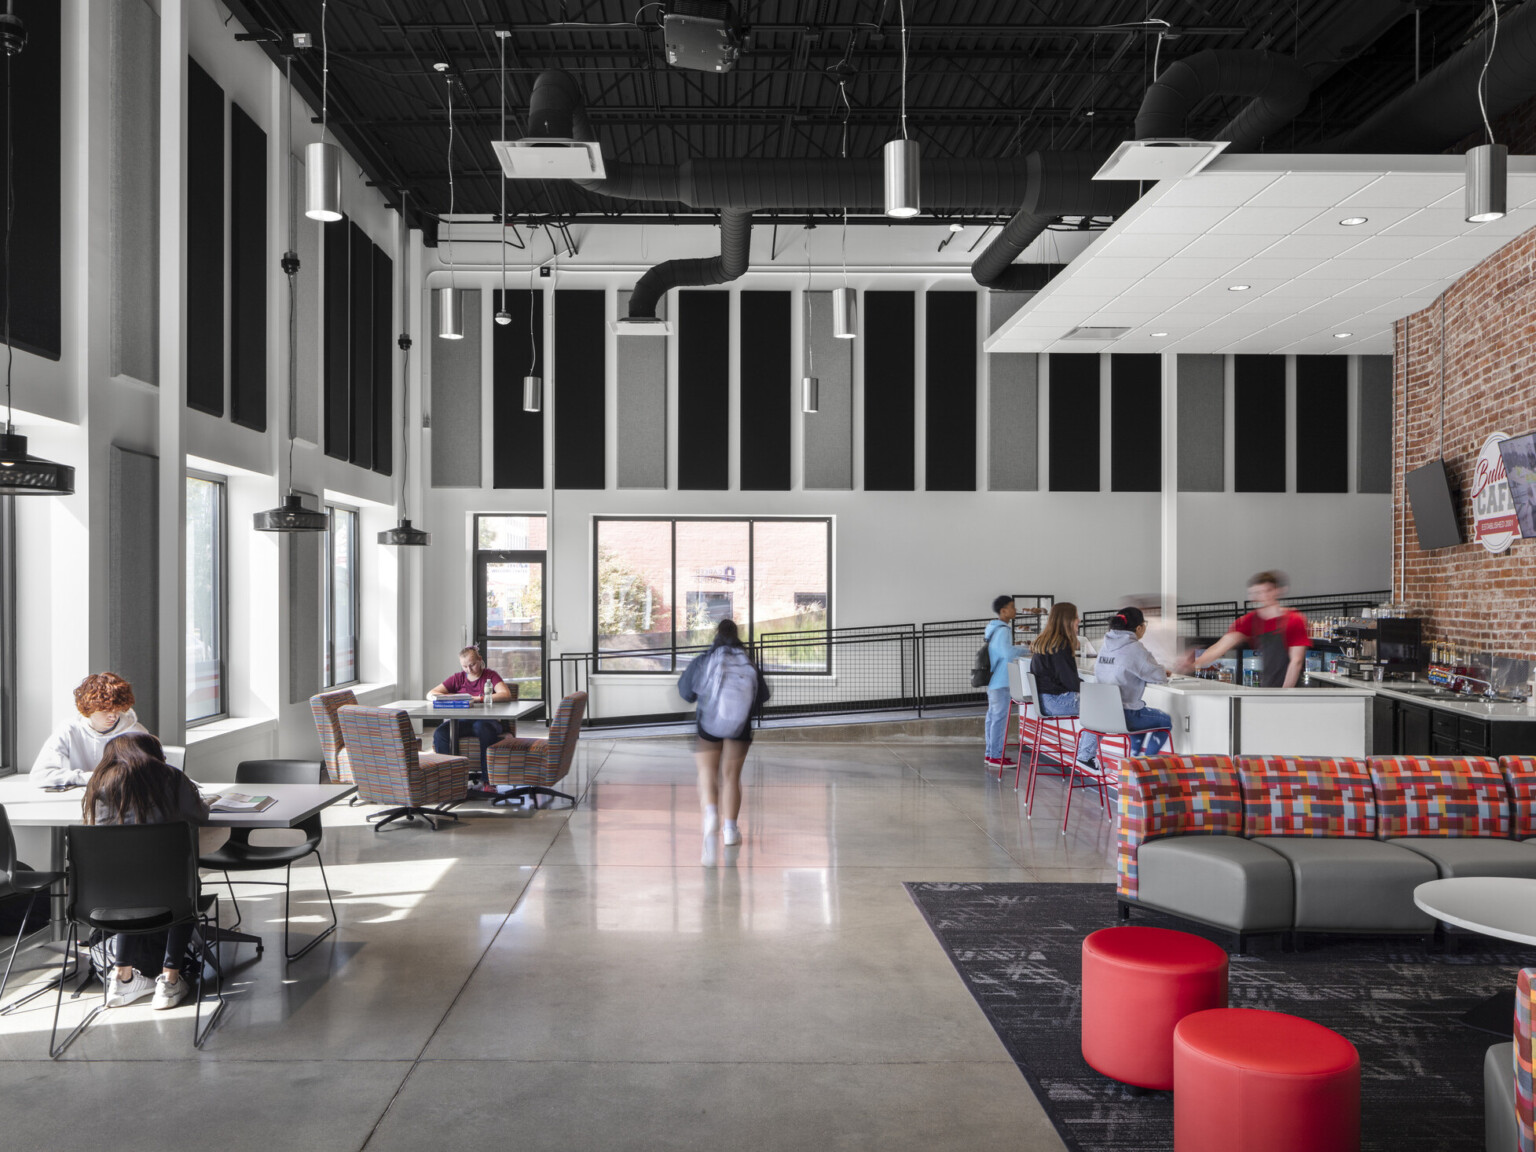 Ottumwa Career Campus interior seating area with grey and red baffles above mixed seating space, glass garage doors, large windows provide natural light